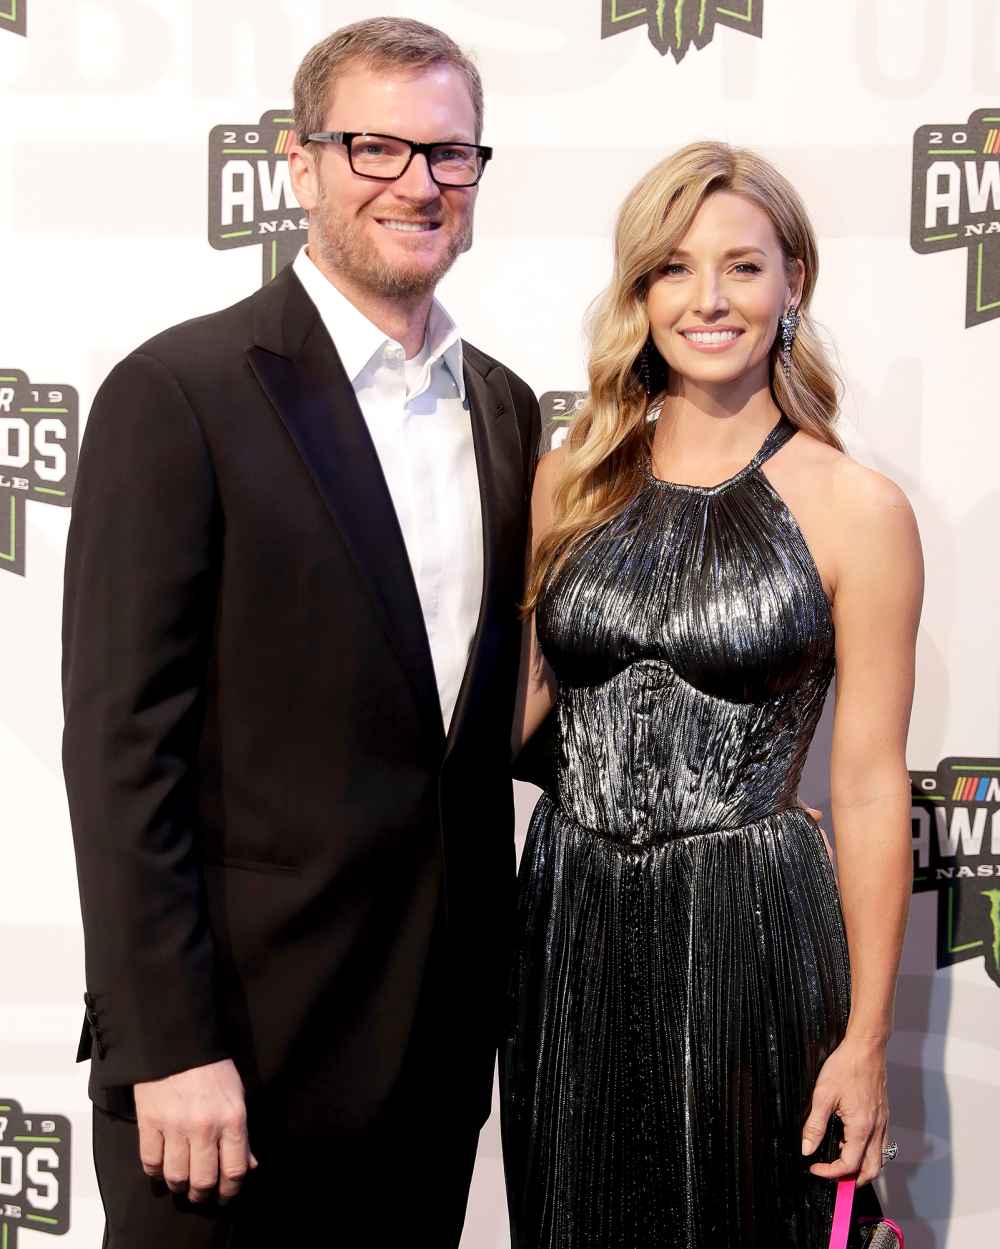 Dale Earnhardt Jr Welcomes 2nd Child With Wife Amy